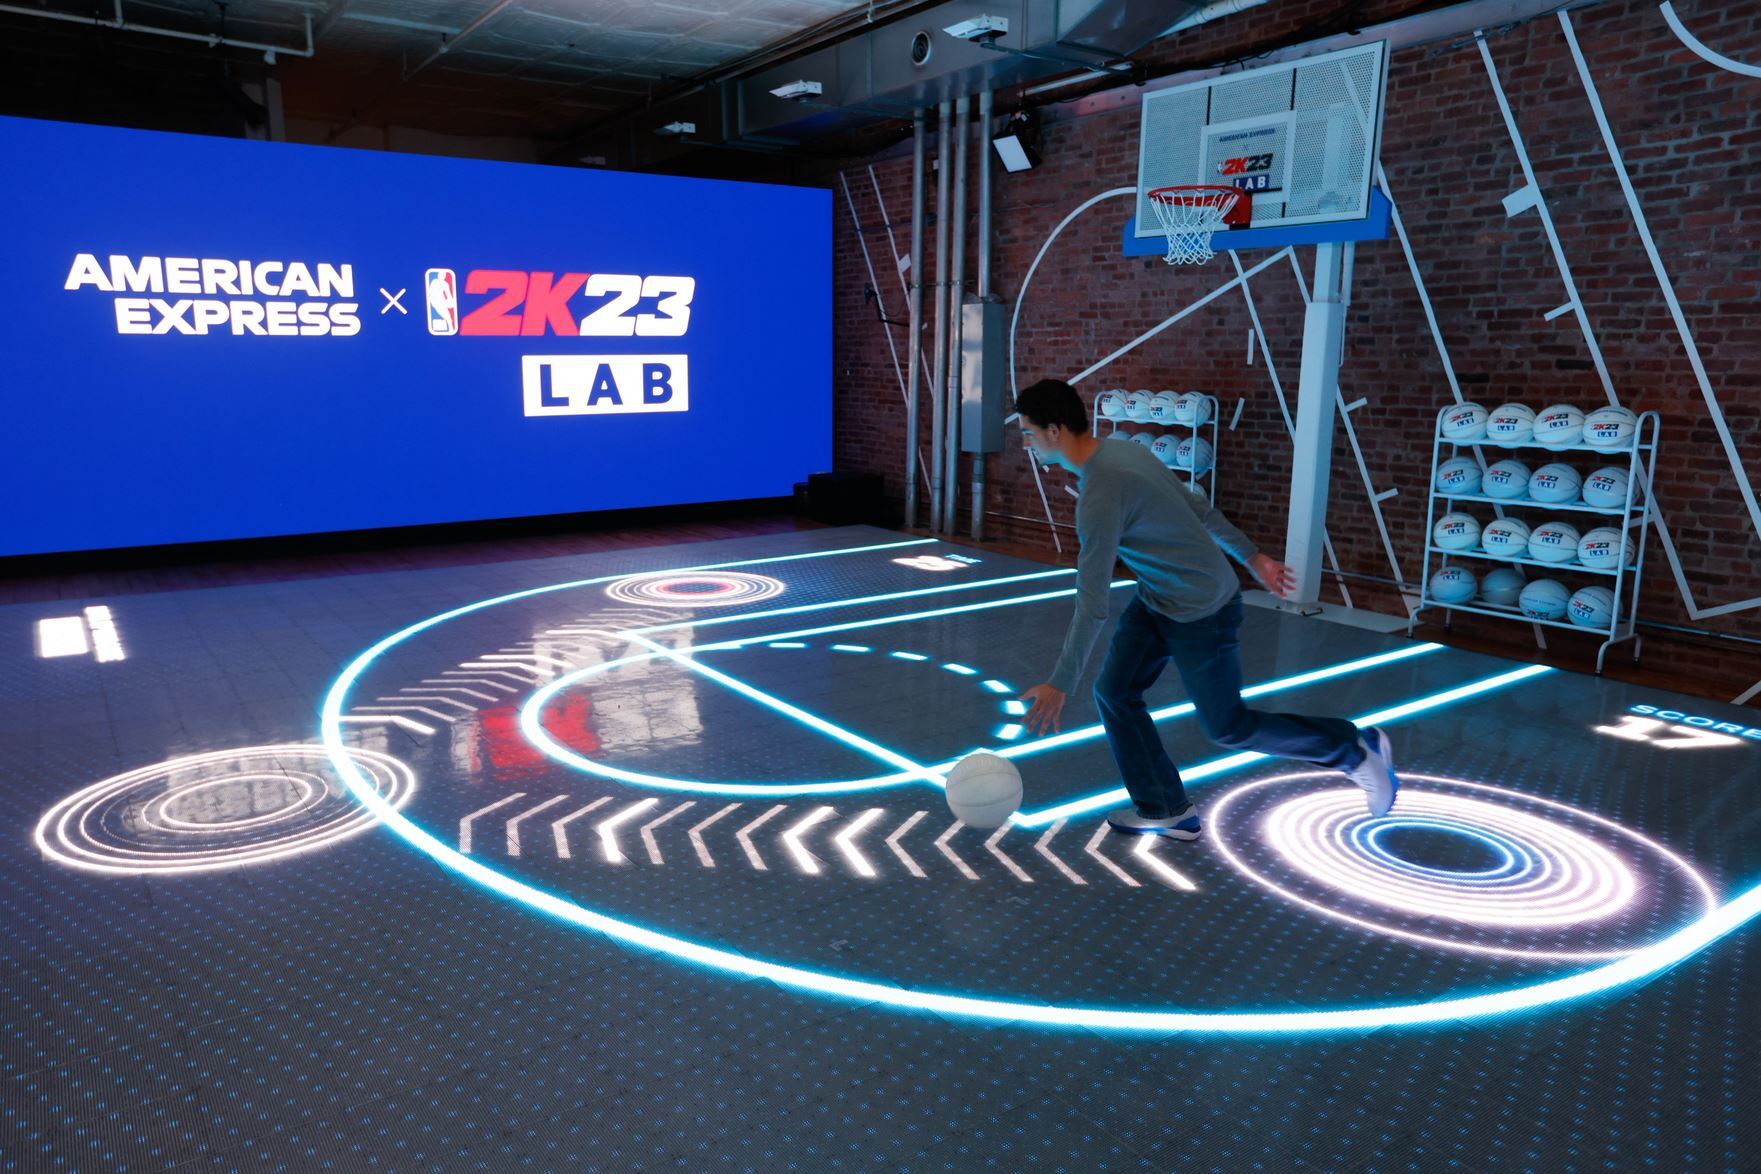 American Express x NBA 2K23 collaboration event which features an LED basketball court